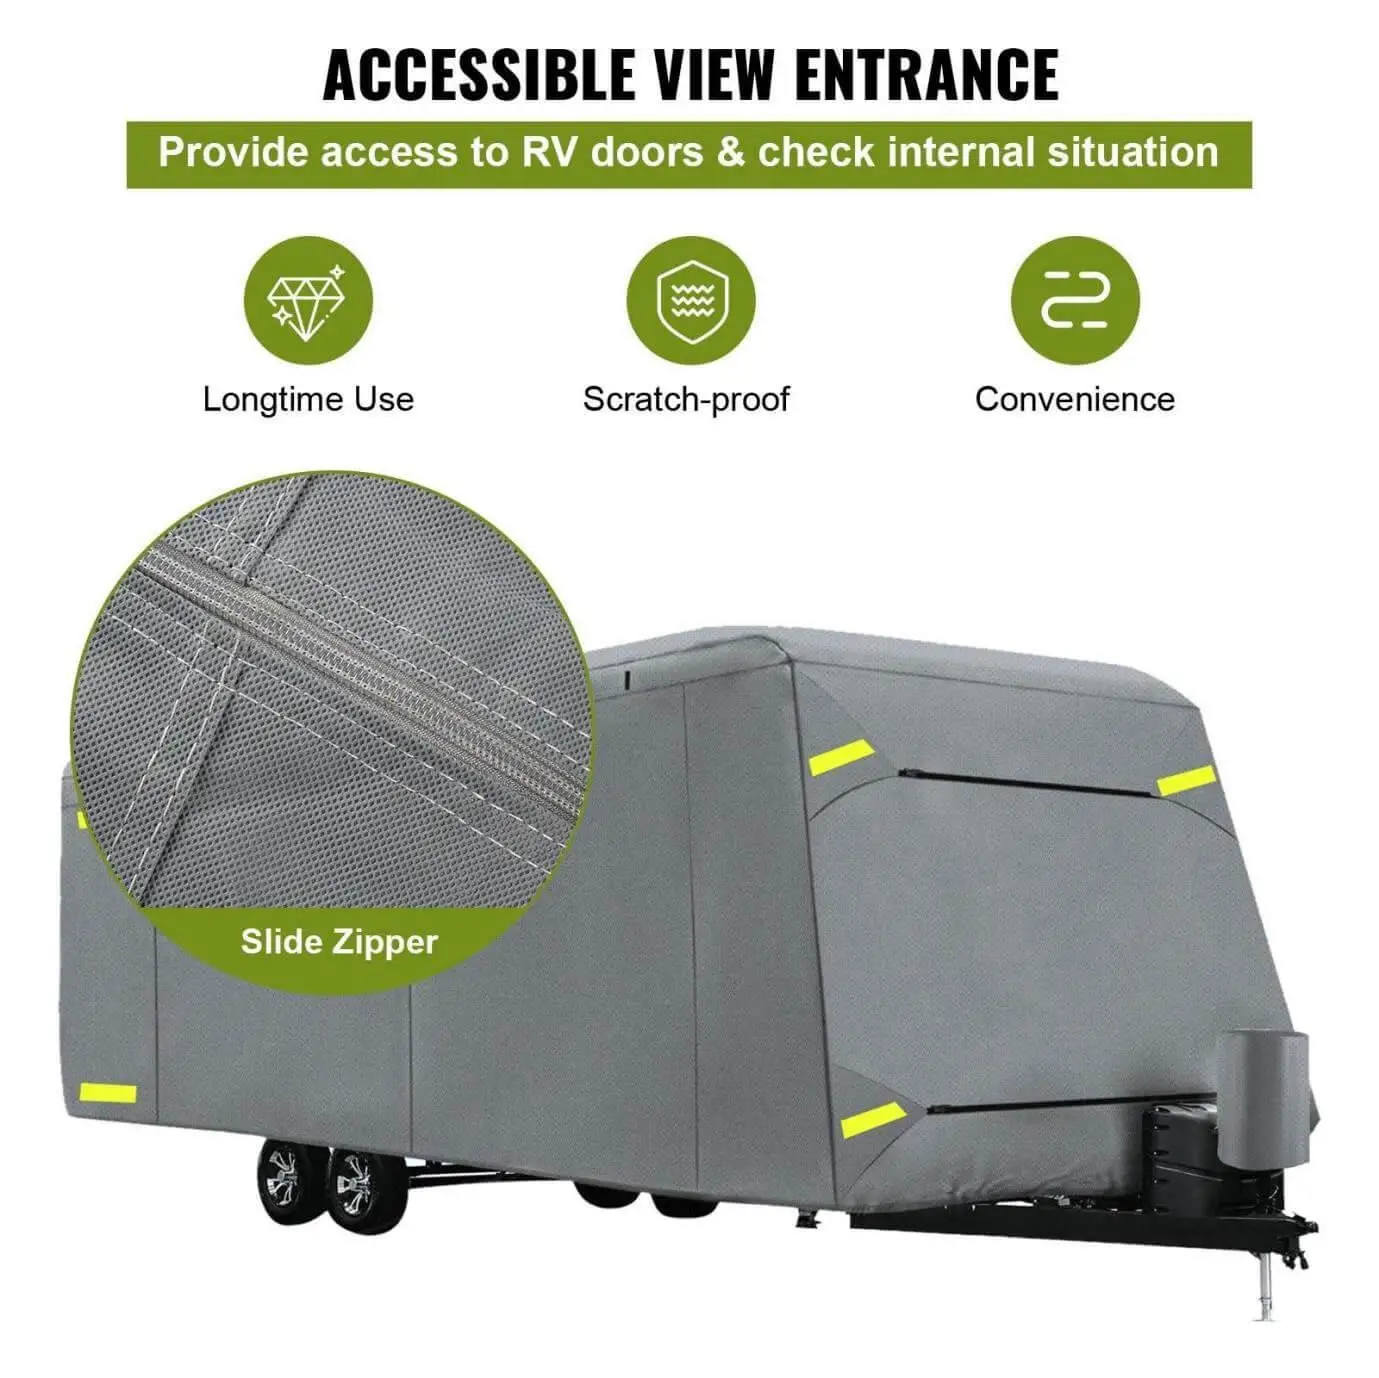 travel-trailer-waterproof-rv-covers-accessible-entrance